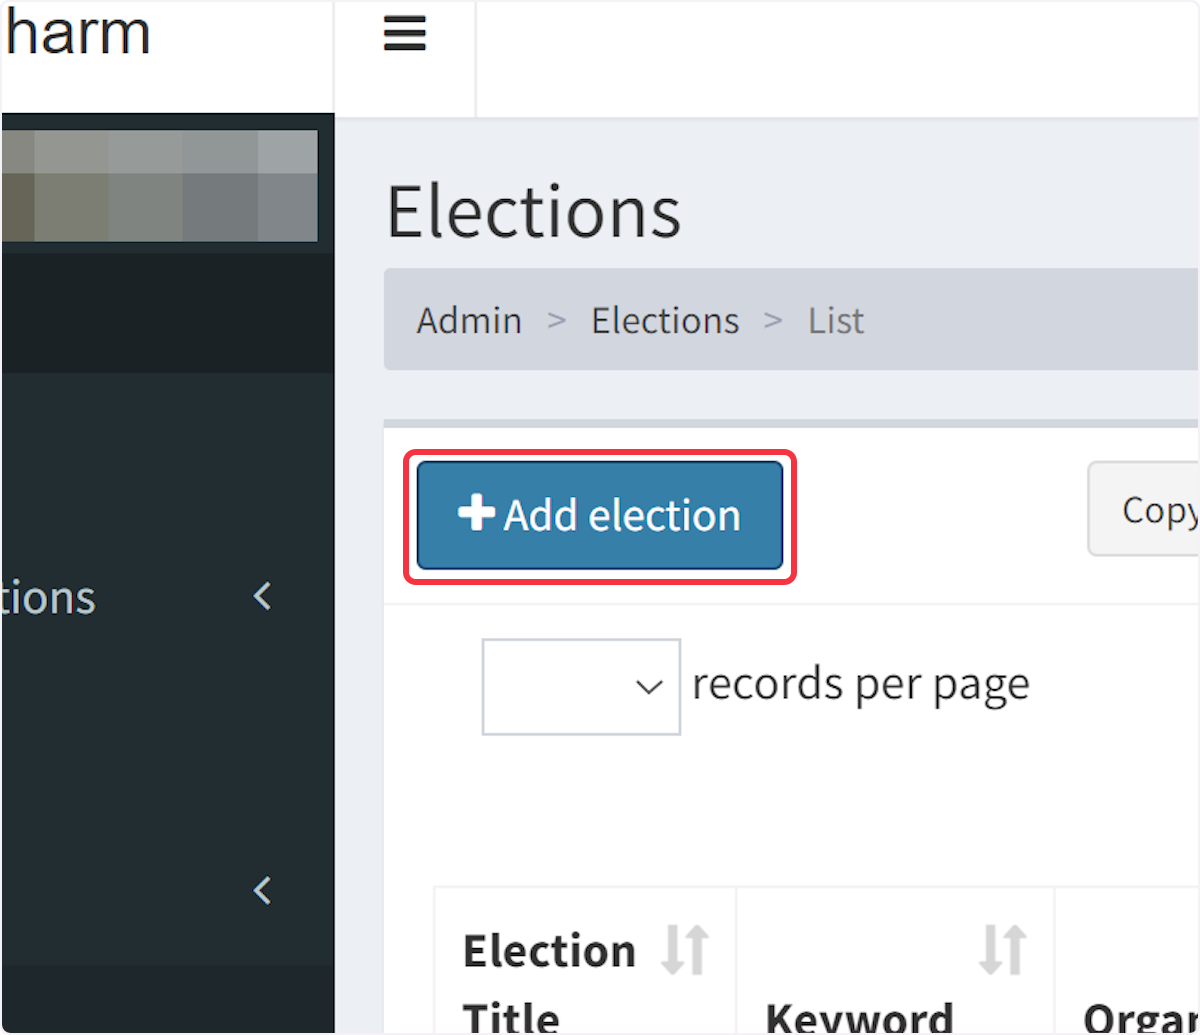 Click on "Add Election" to initiate the creation process.